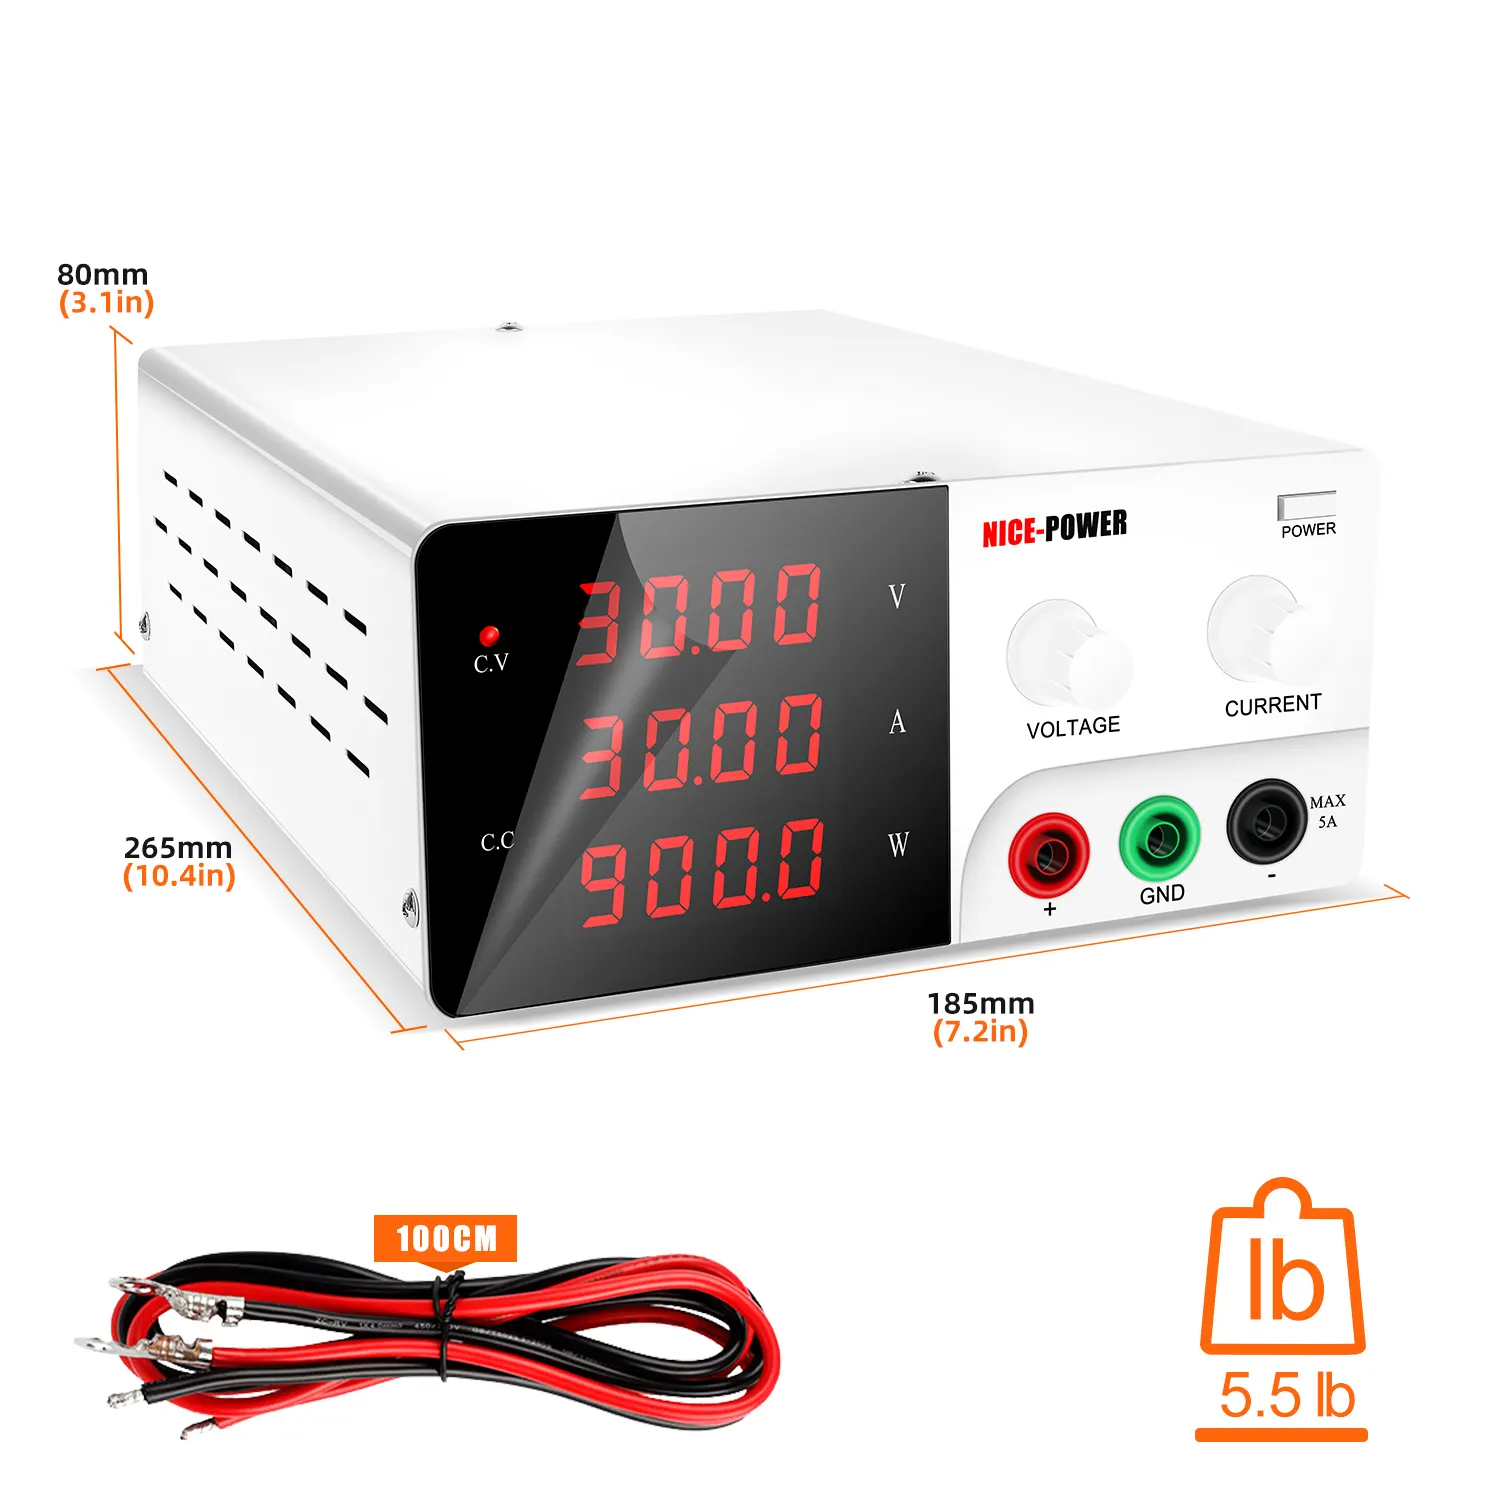 Factory Price DC Regulated Power Supply 30V 30A 900W Digital Adjustable Switching Lab Test Repair Power Souce